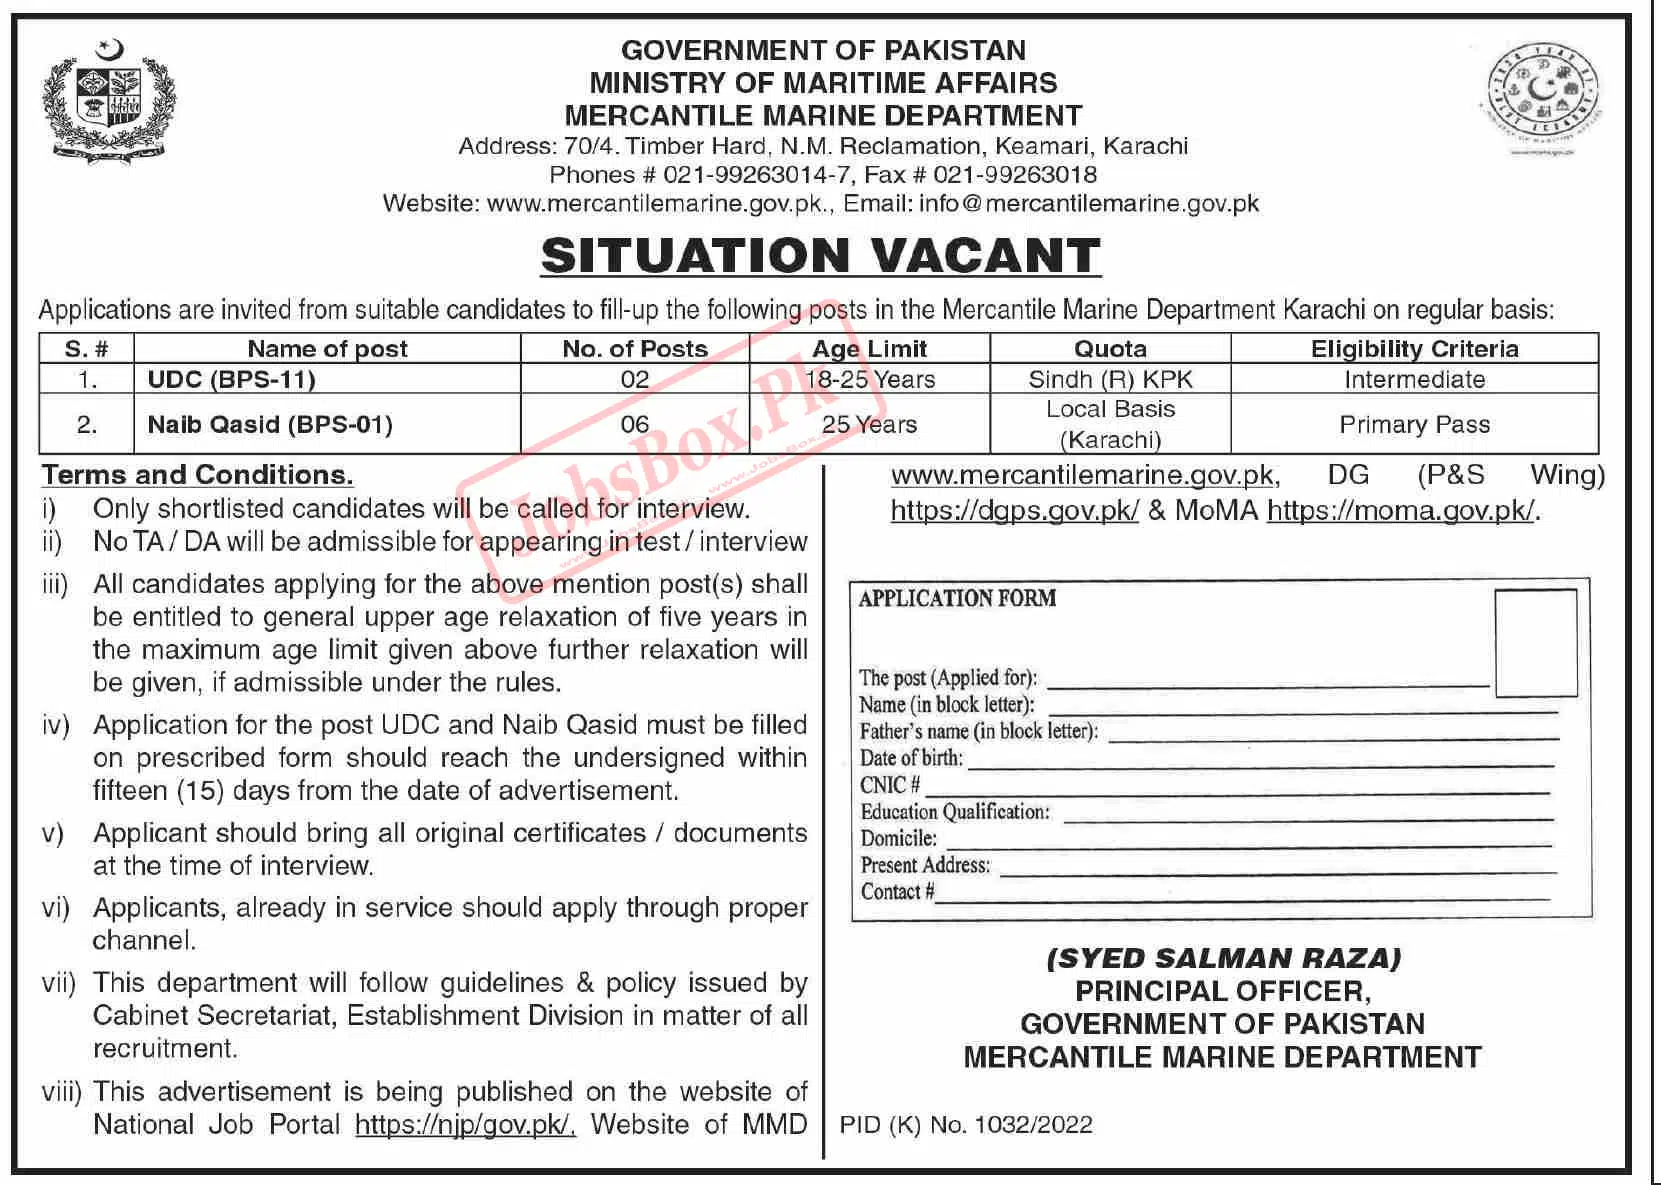 Ministry of Maritime Affairs - Mercantile Marine Department Jobs 2022